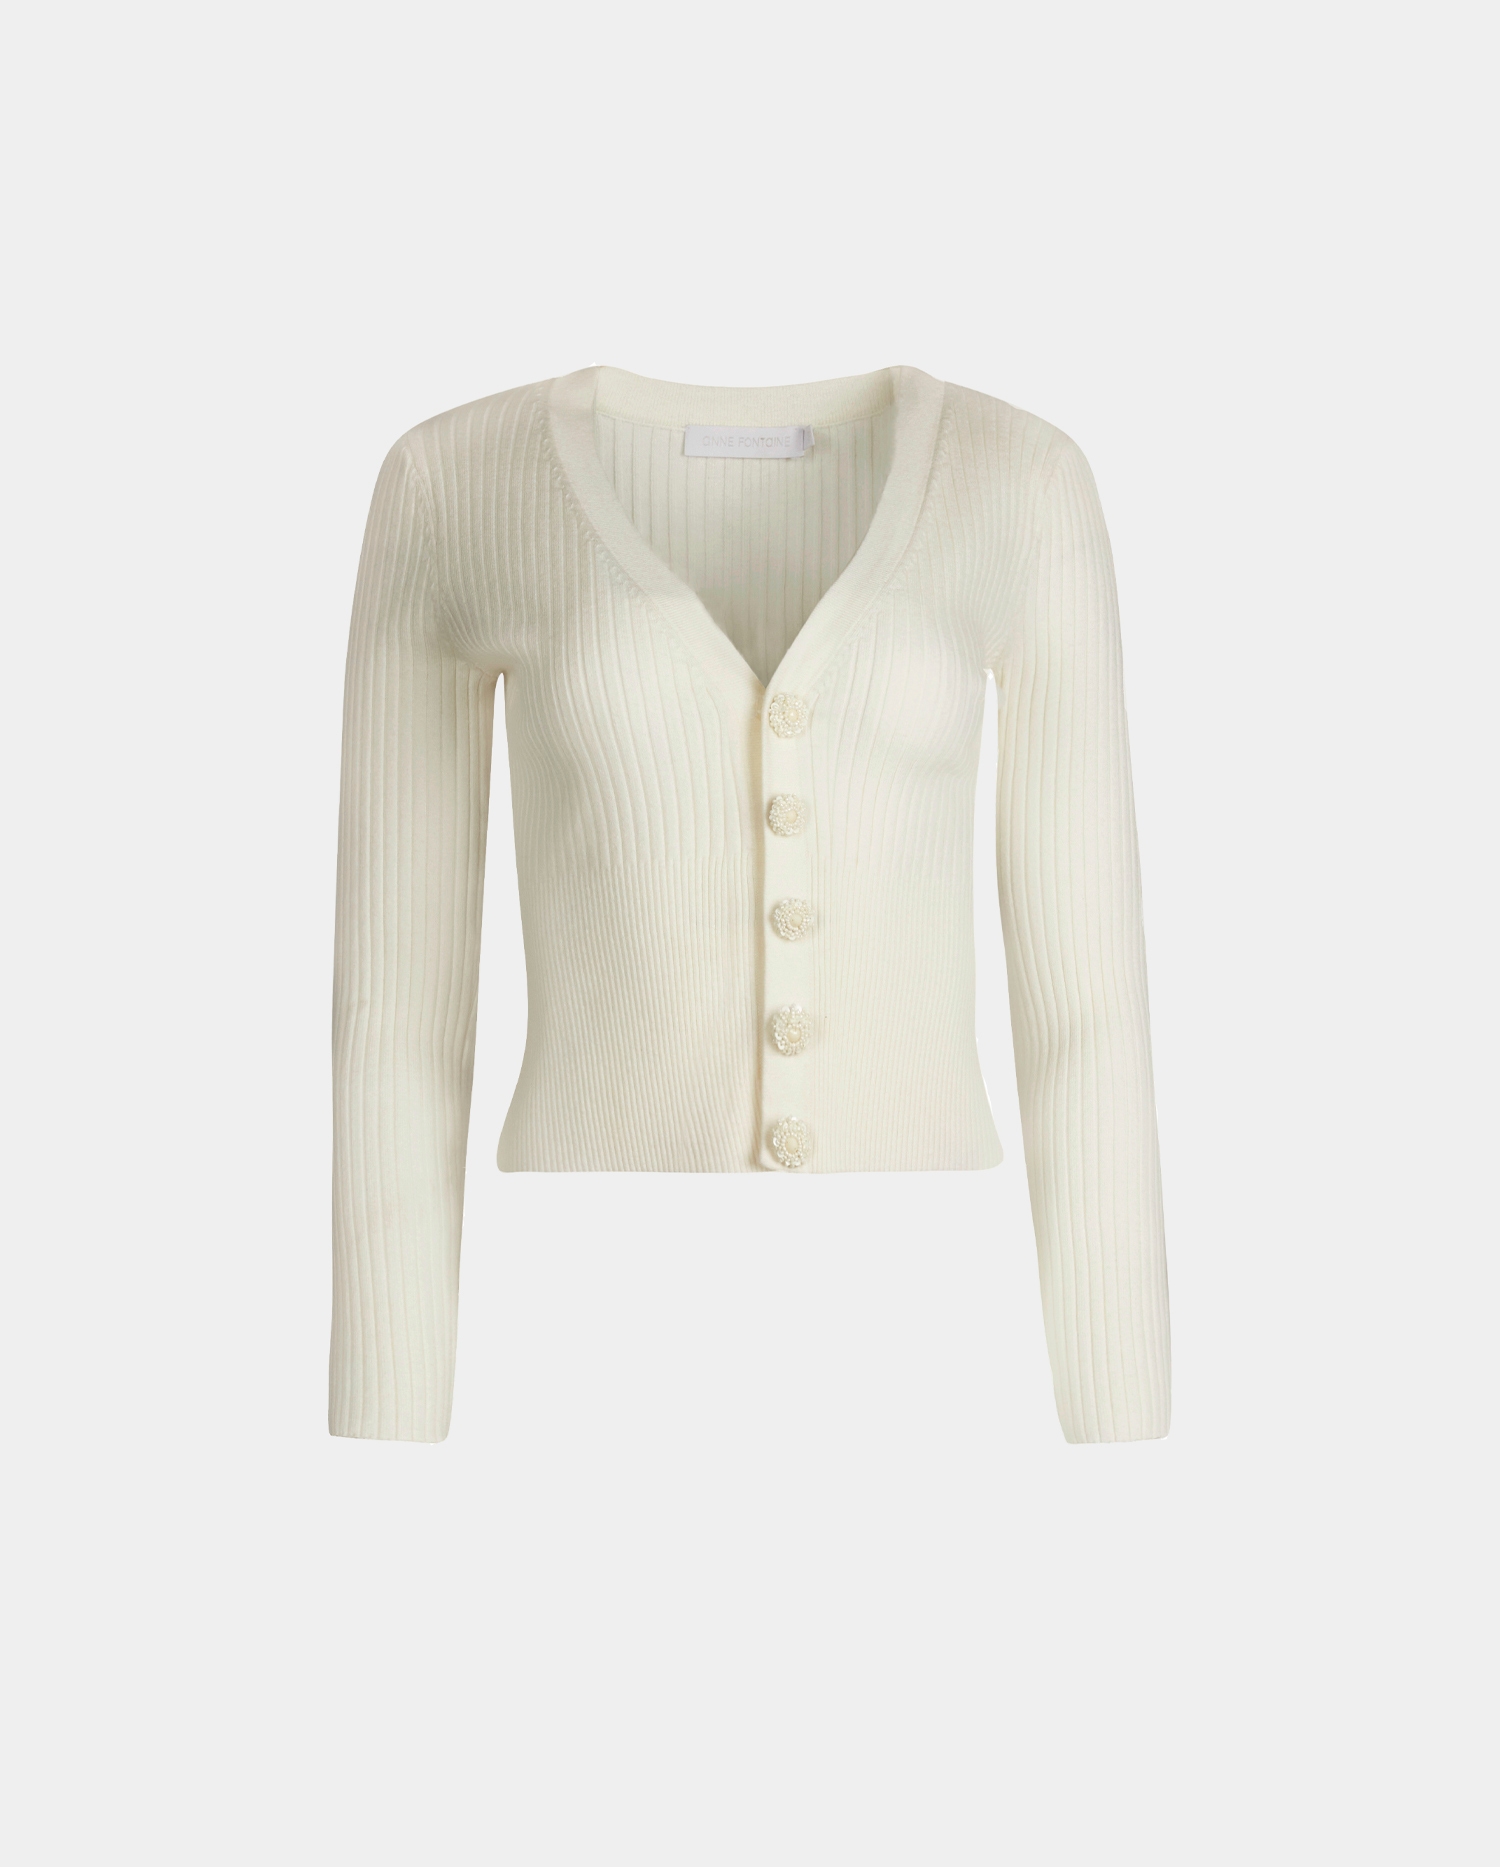 Shop the SOLFEGE white ribbed cropped cardgian with fancy button details from ANNE FONTAINE